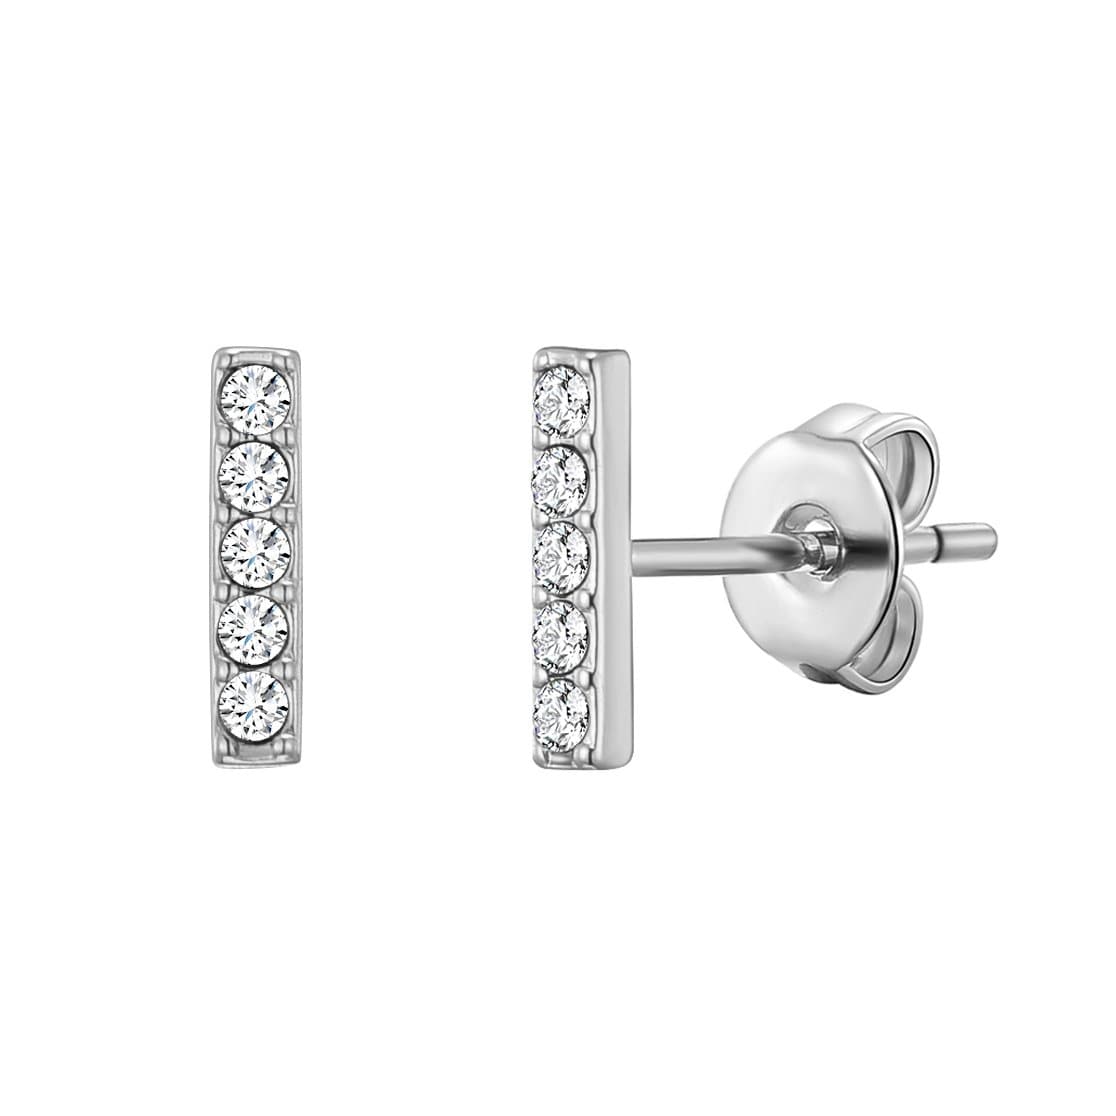 Silver Plated Bar Earrings Created with Zircondia® Crystals by Philip Jones Jewellery